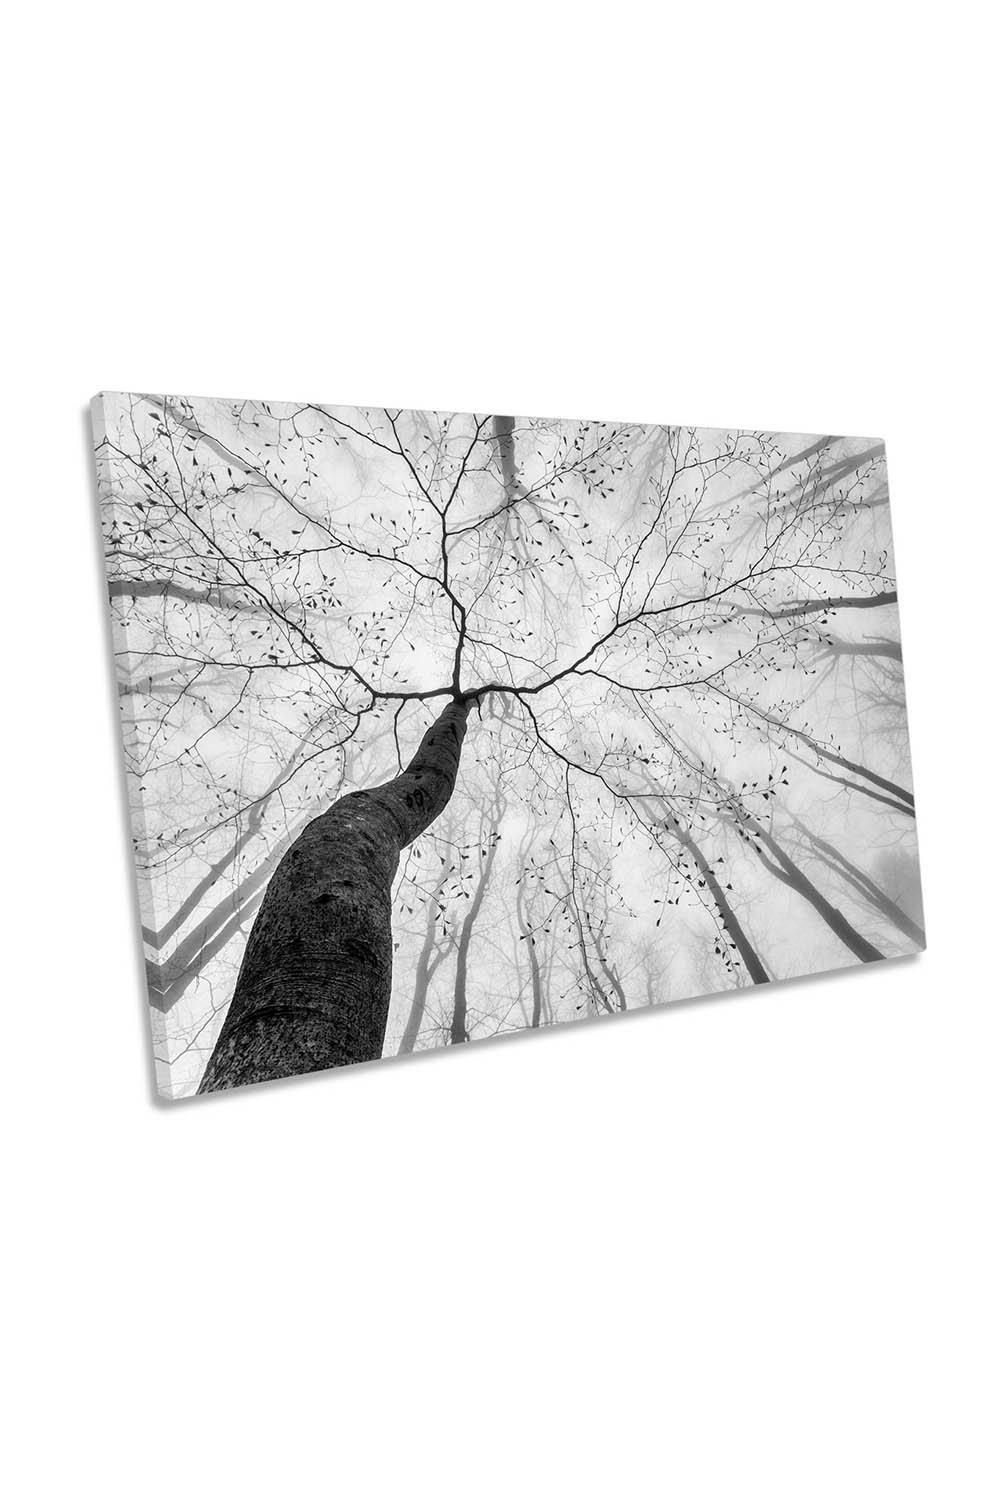 A View of the Tree Crown Forest Canvas Wall Art Picture Print